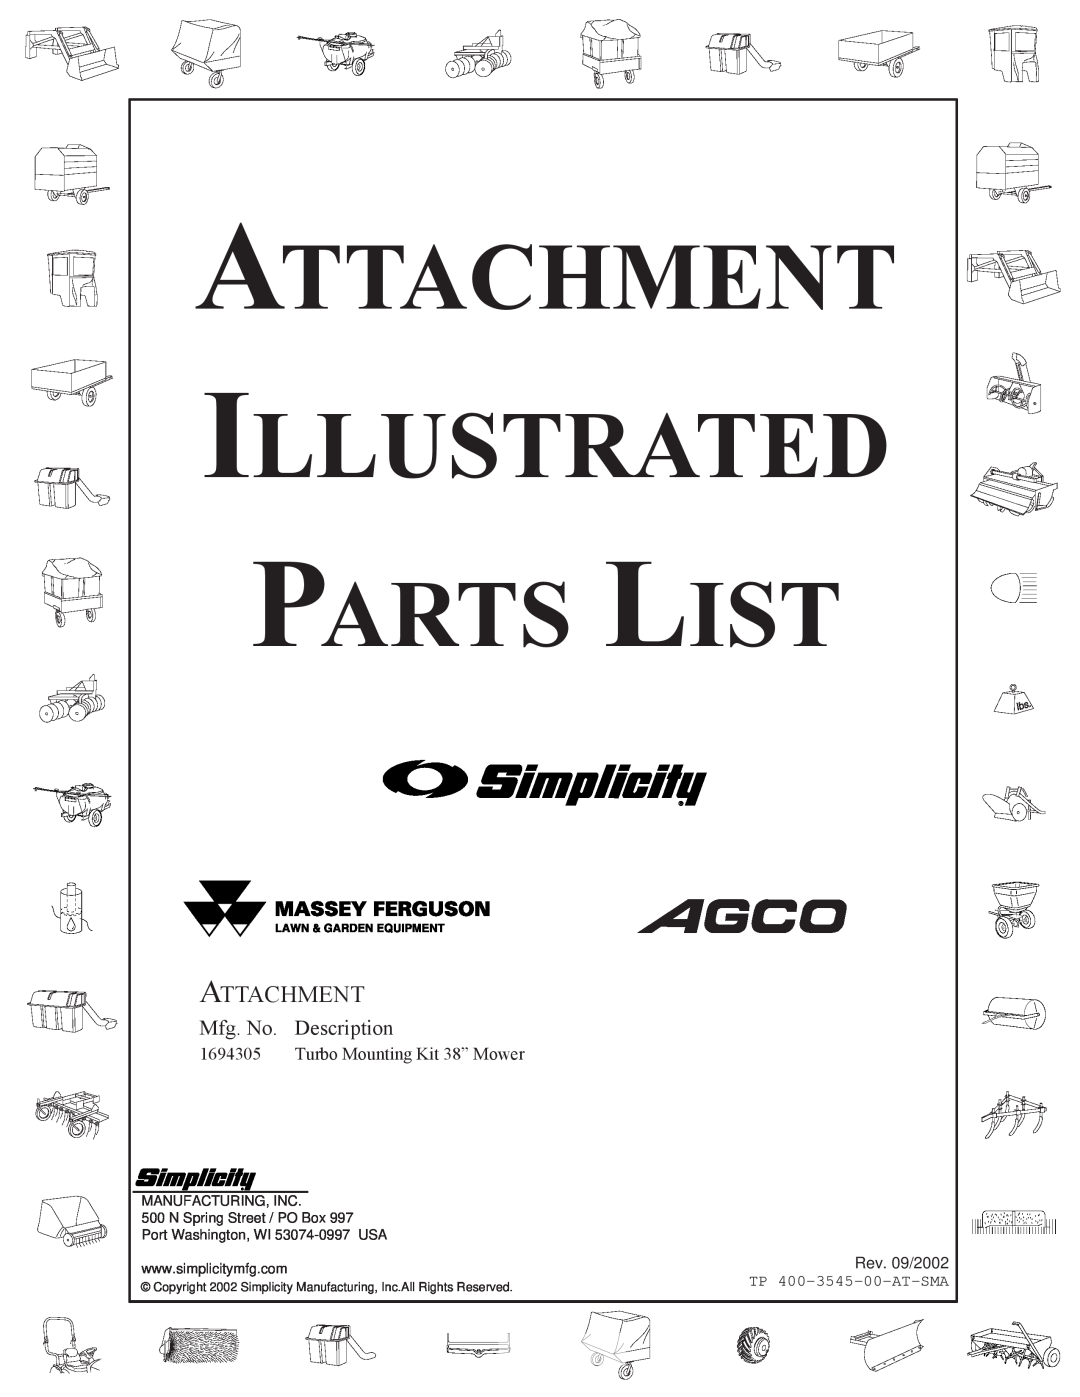 Snapper 3545 manual Attachment Illustrated Parts List, Mfg. No. Description, Turbo Mounting Kit 38” Mower, Rev. 09/2002 